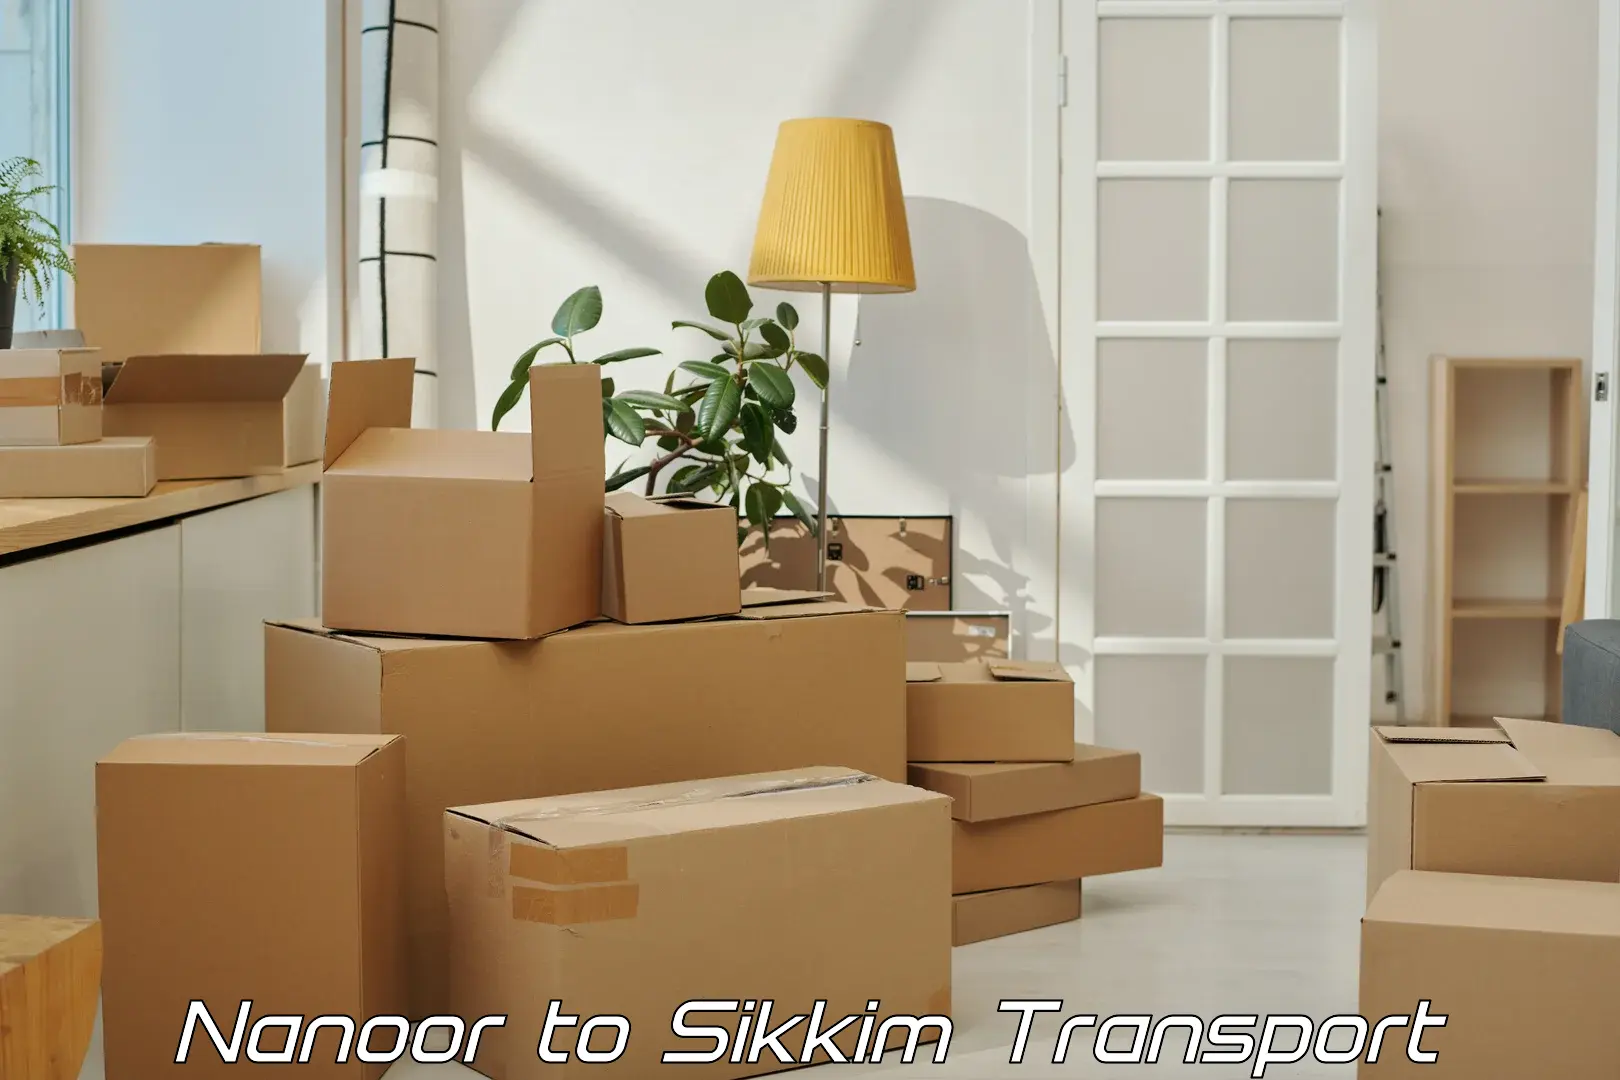 Vehicle transport services Nanoor to Sikkim